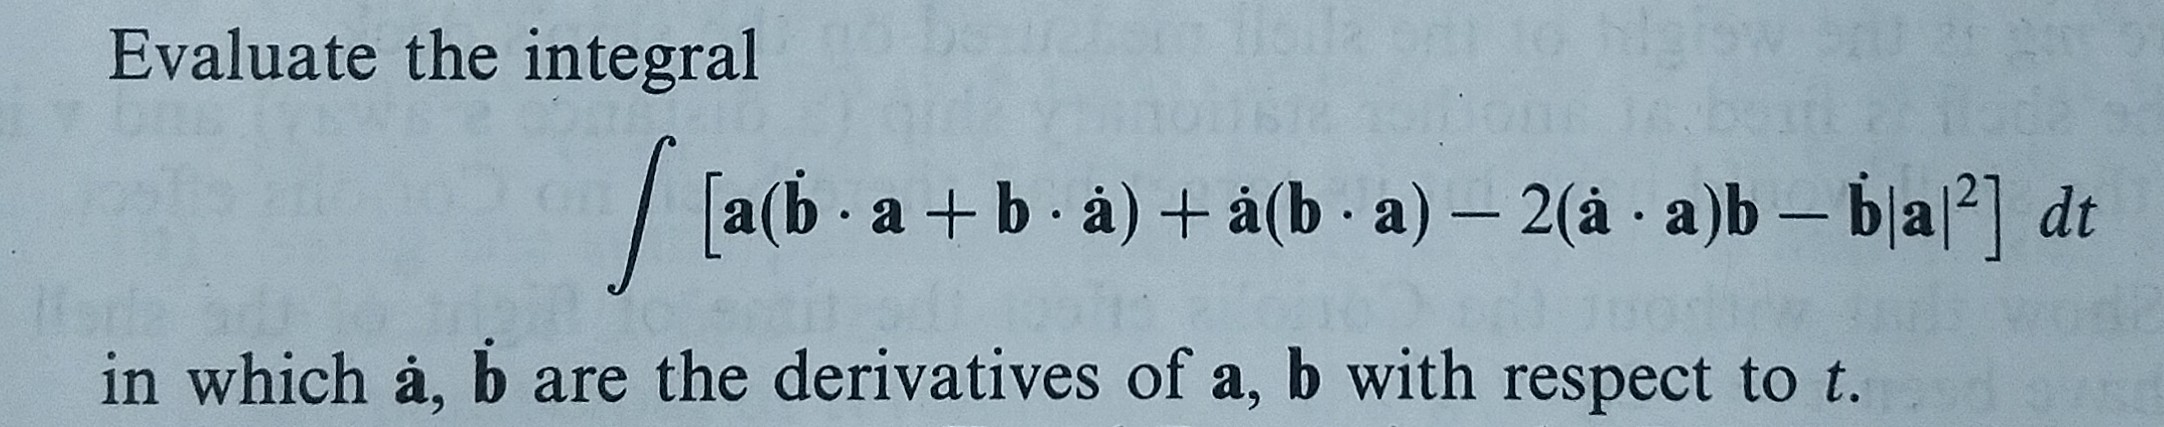 Evaluate the integral
in which å, b are the derivatives of a, b with respect to t.
